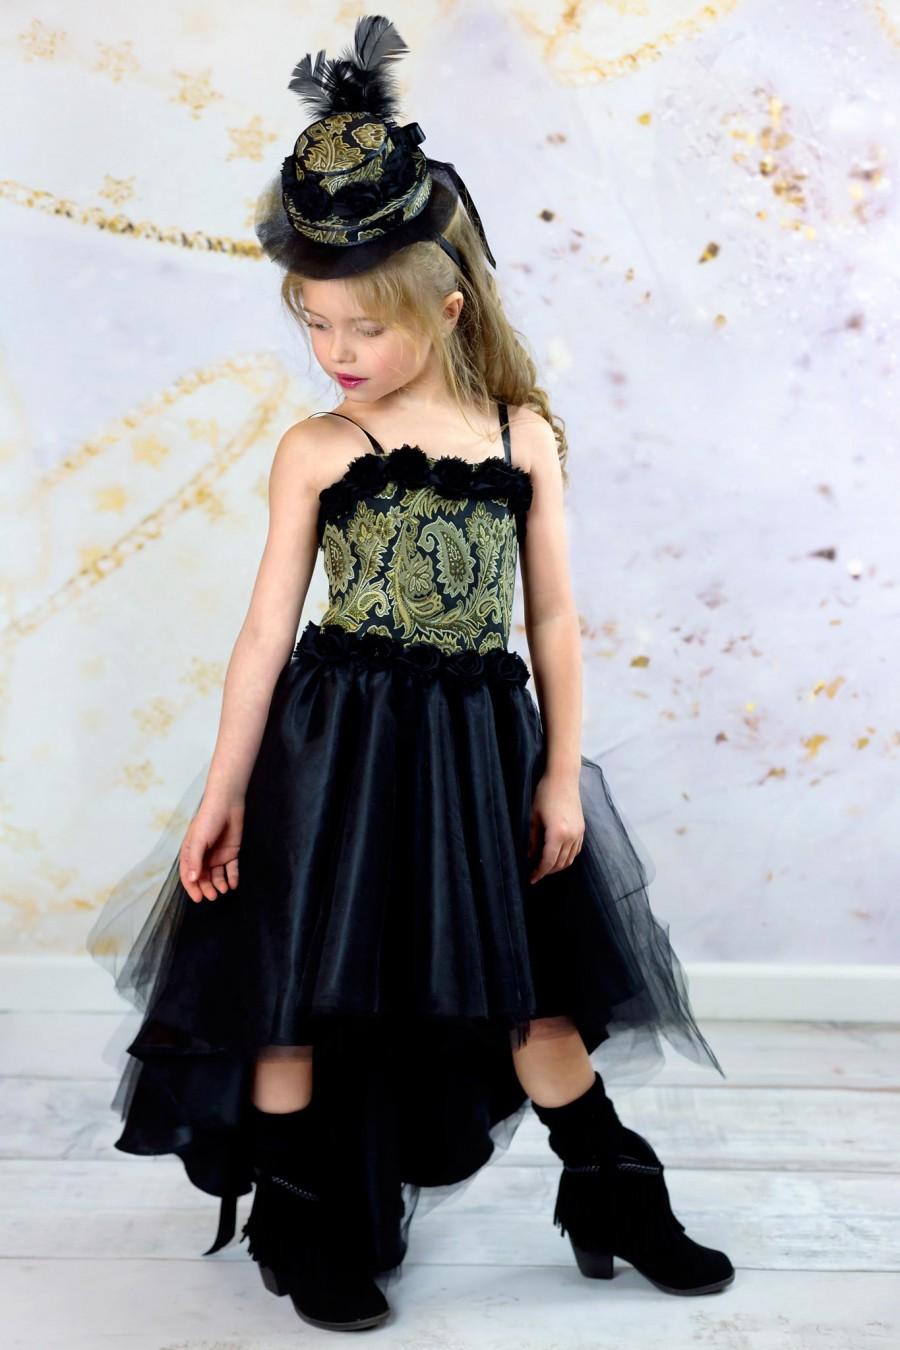 Mariage - Girls Haute Couture Dress - Black and Gold Corset Dress - Pageant Gown - High Low Party Dress - Fascinator Hat - Flower Girl Dress 3t to 10